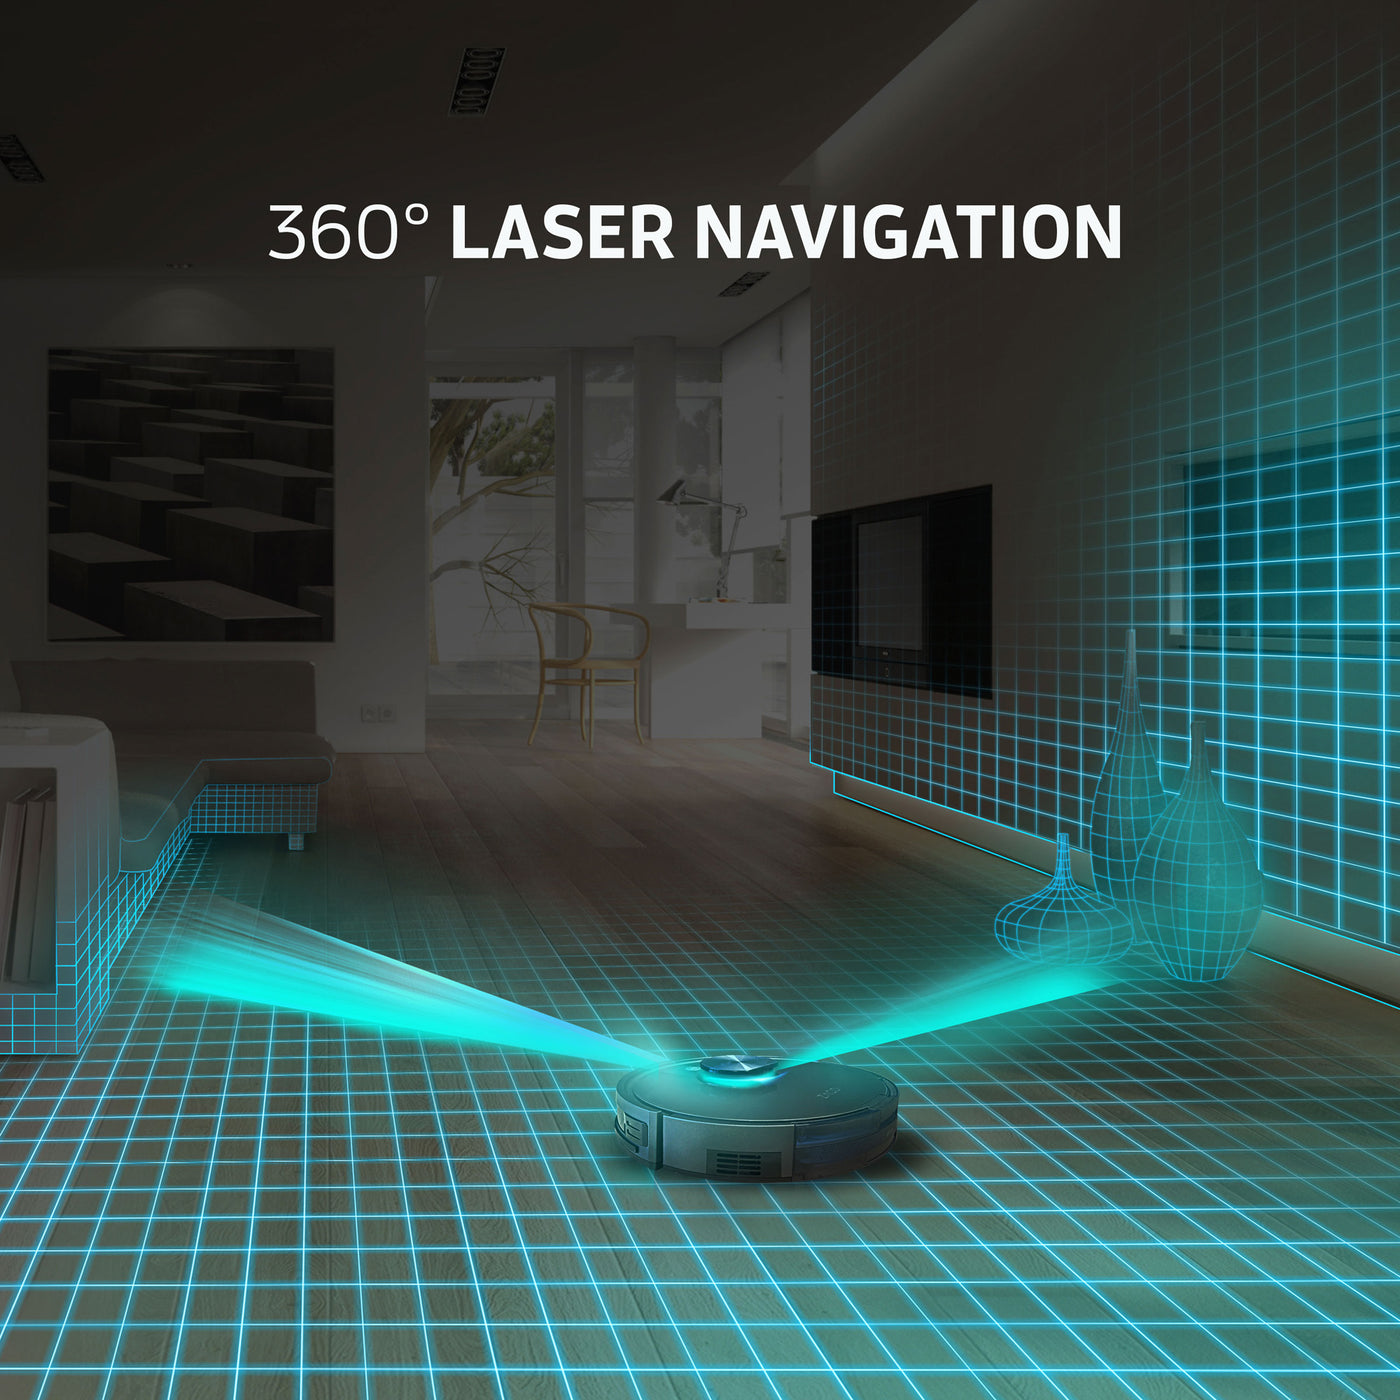 ZACO A10 vacuuming and mopping robot with laser navigation